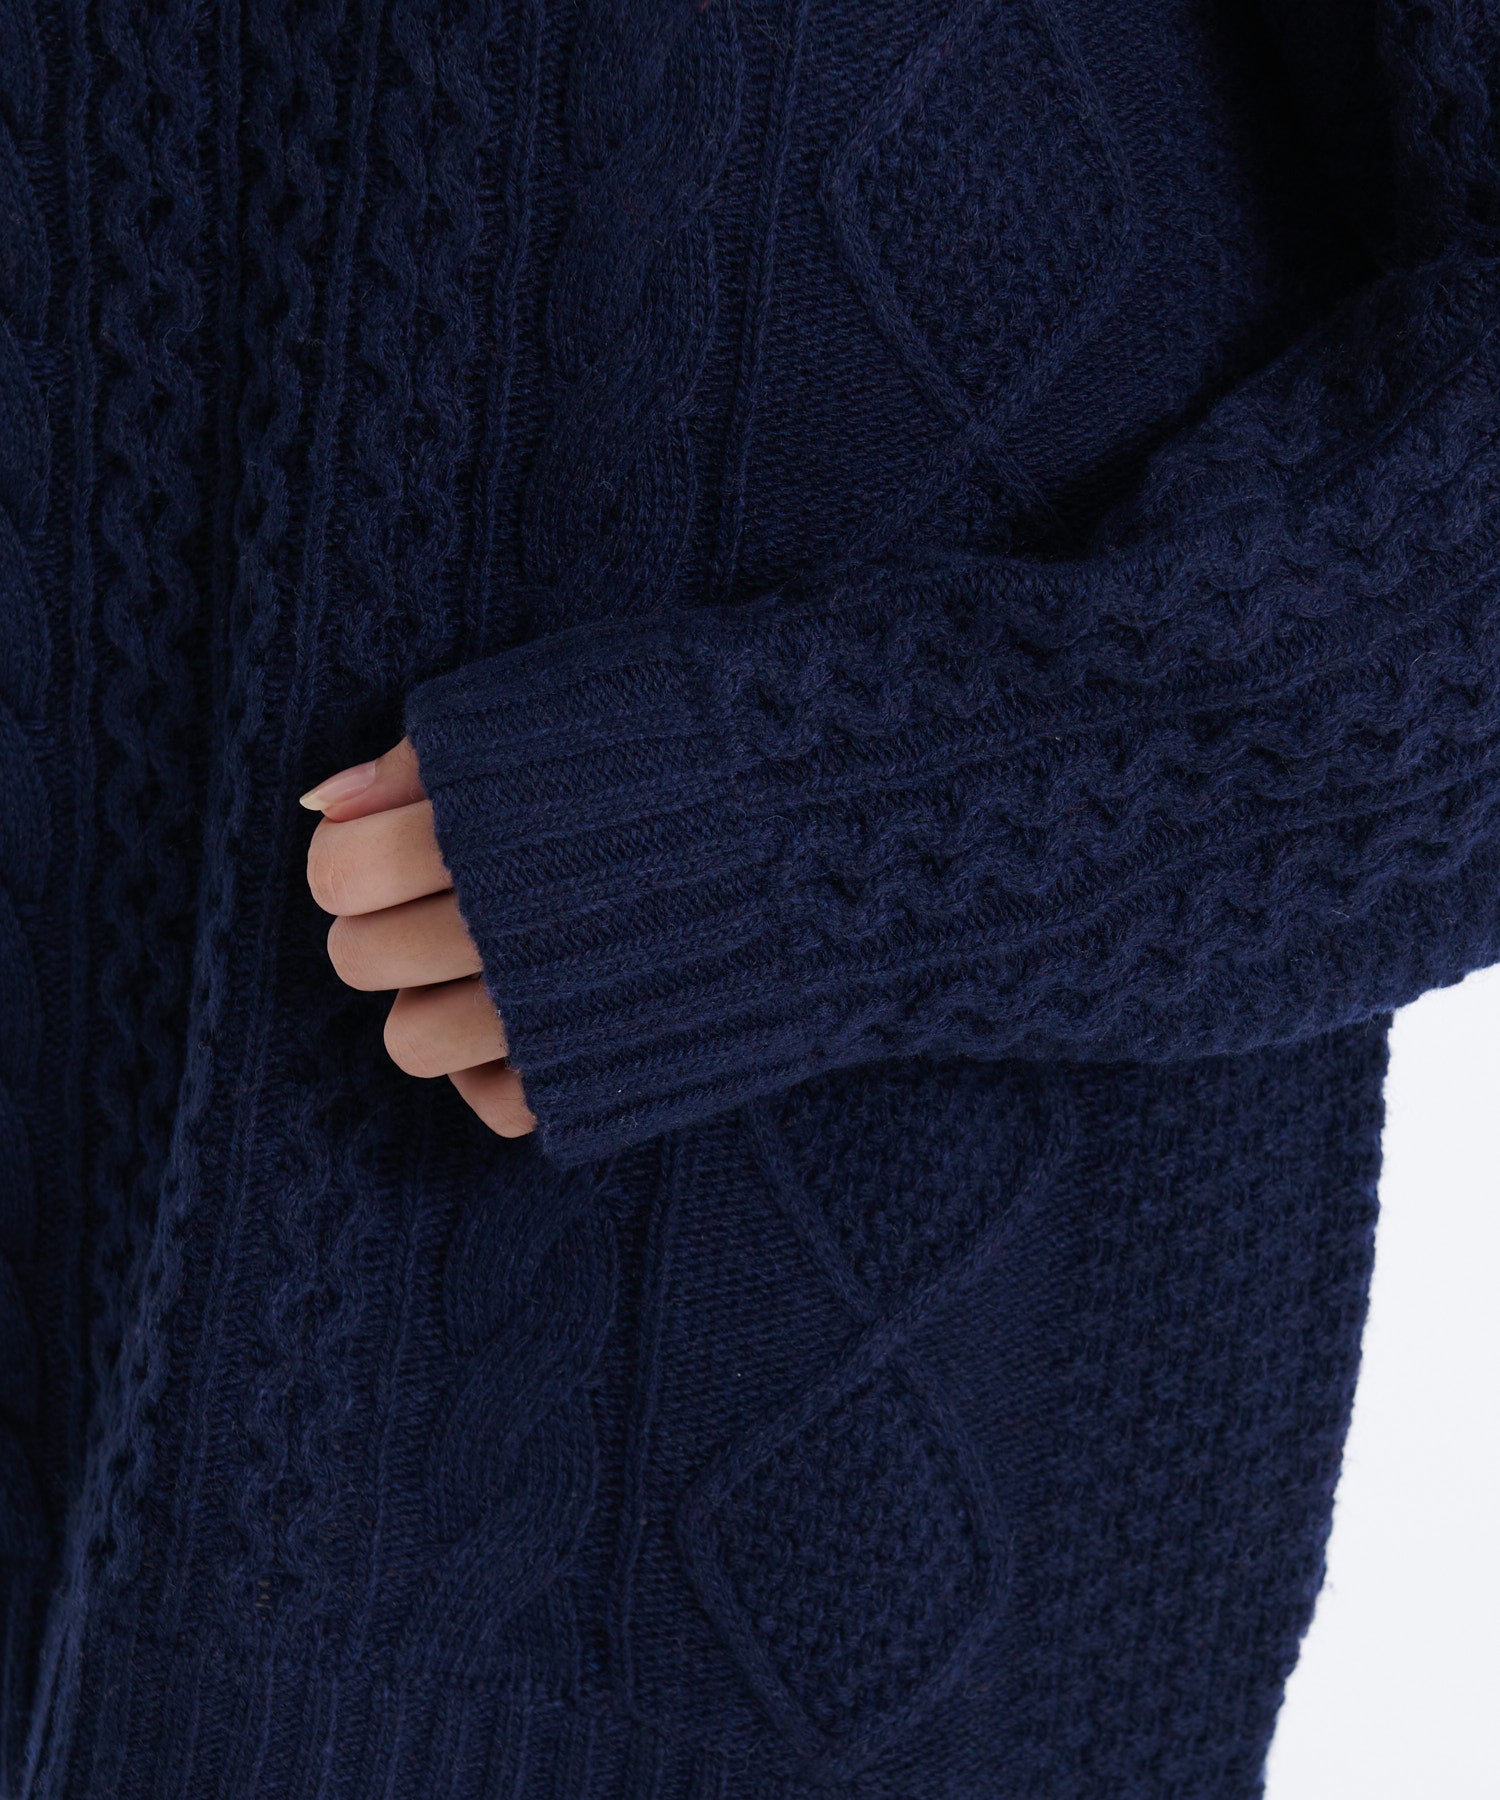 【TIME SALE】 ケーブルニットセーター/CABLE KNIT SWEATER